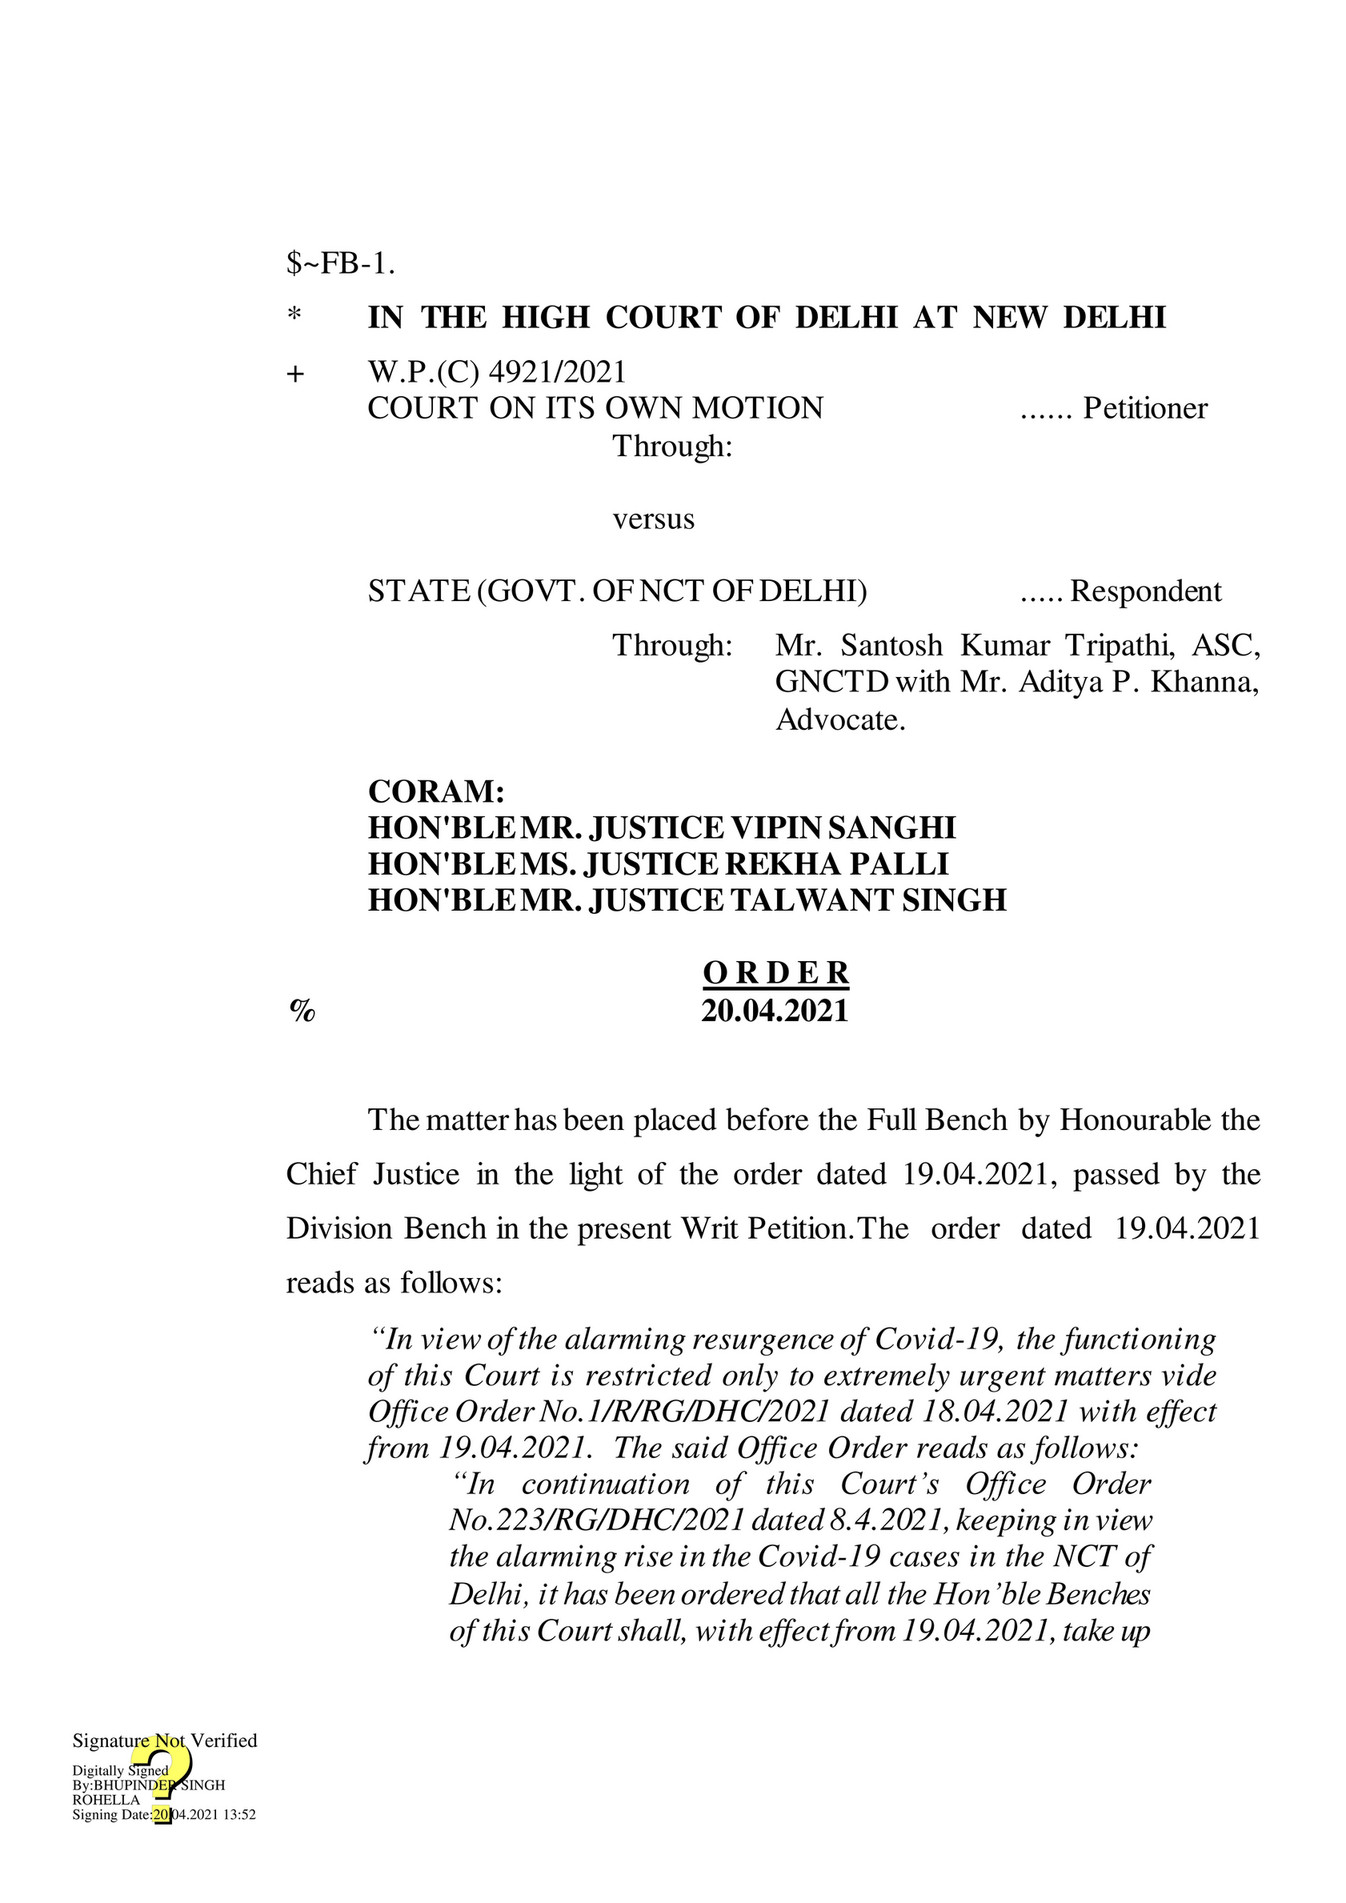 AJAY AMITABH SUMAN - Court of its own Motion Vs State - Page 2-3 ...